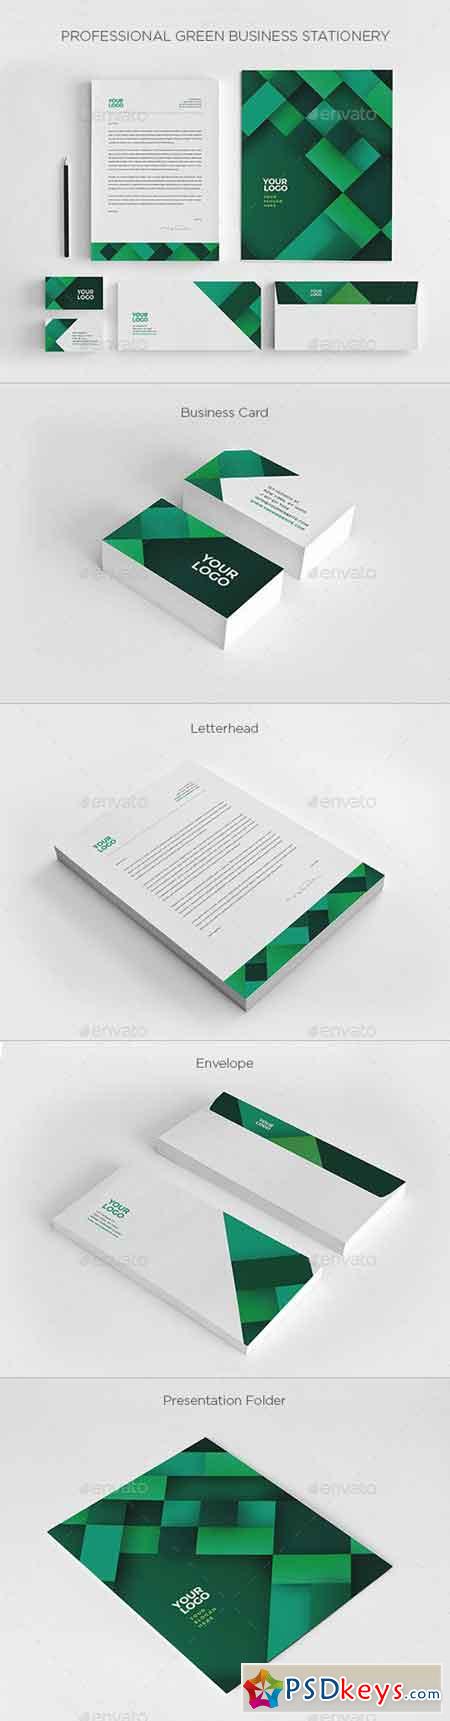 Professional Green Business Stationery 19751586